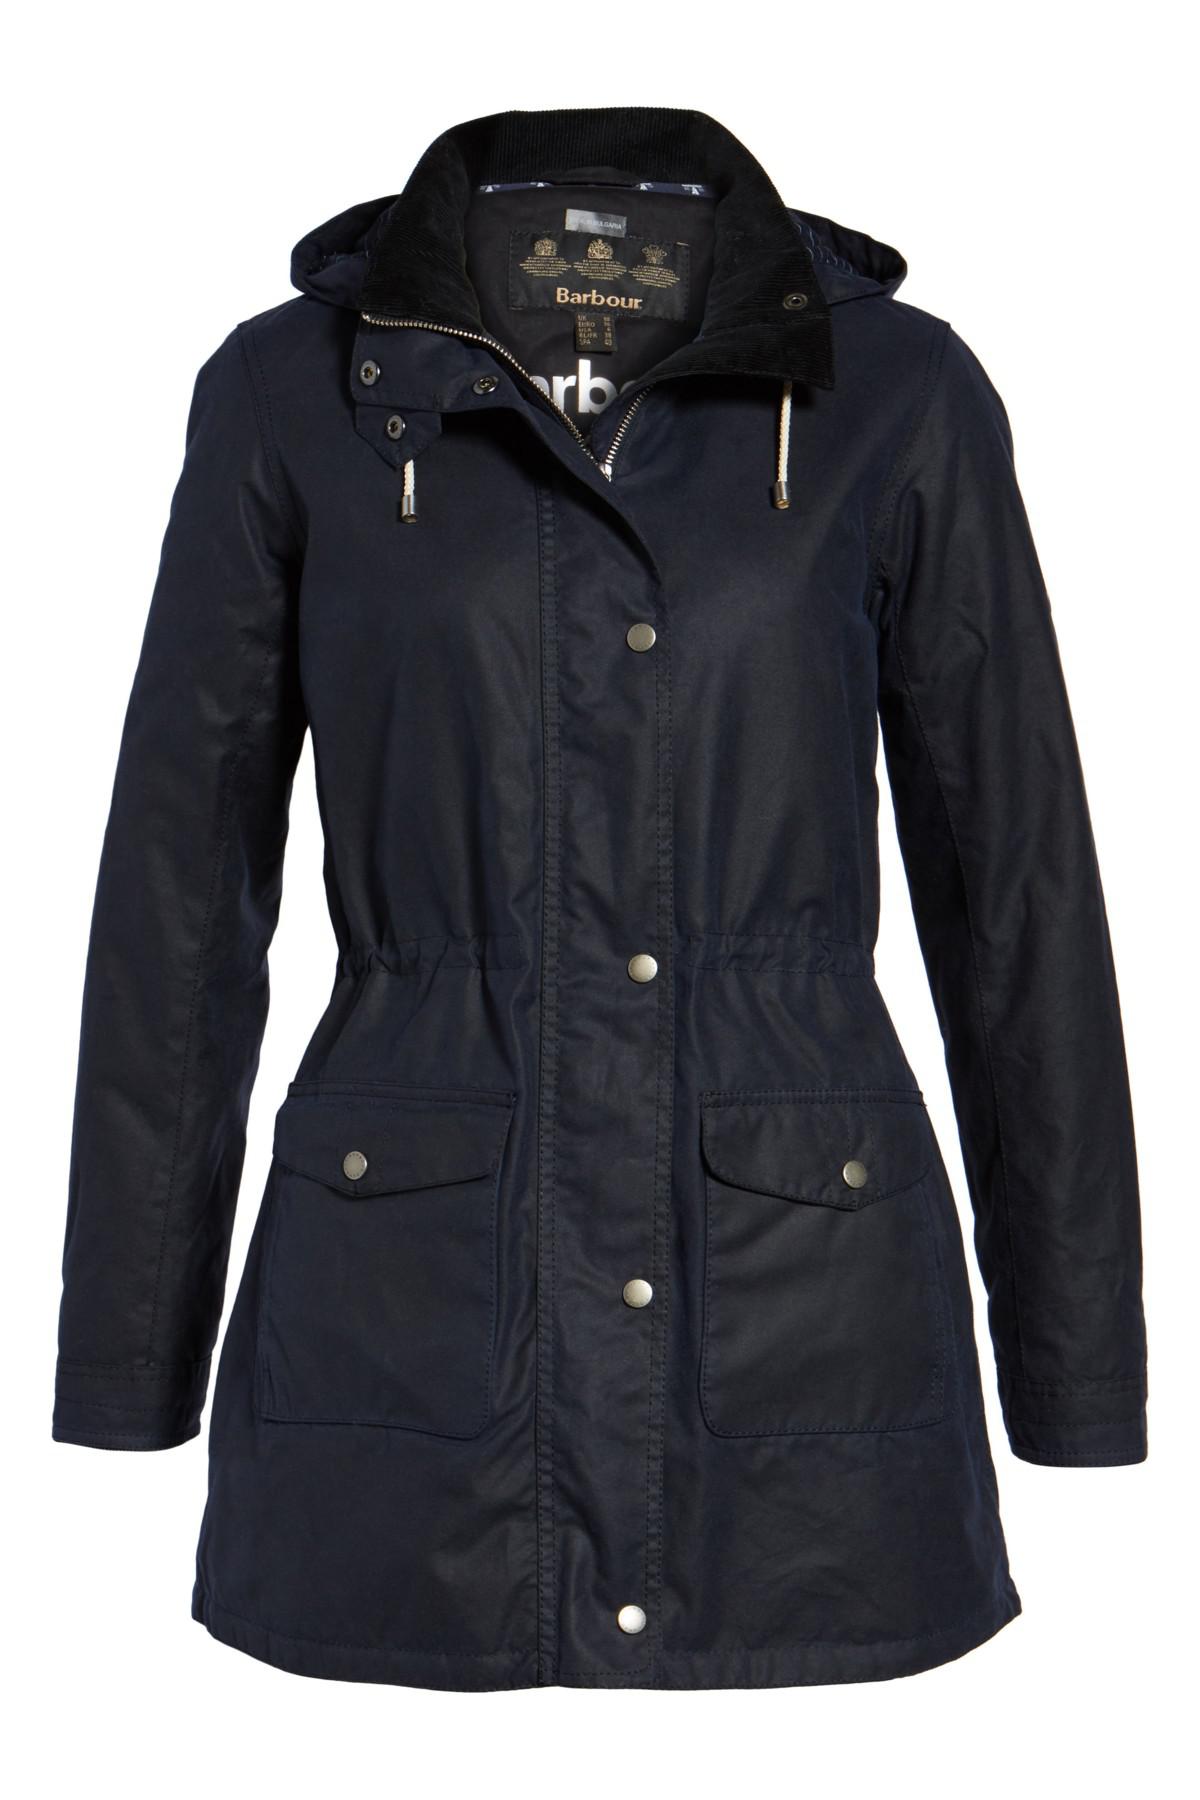 Barbour Selsey Waxed Canvas Hooded Jacket in Blue - Lyst